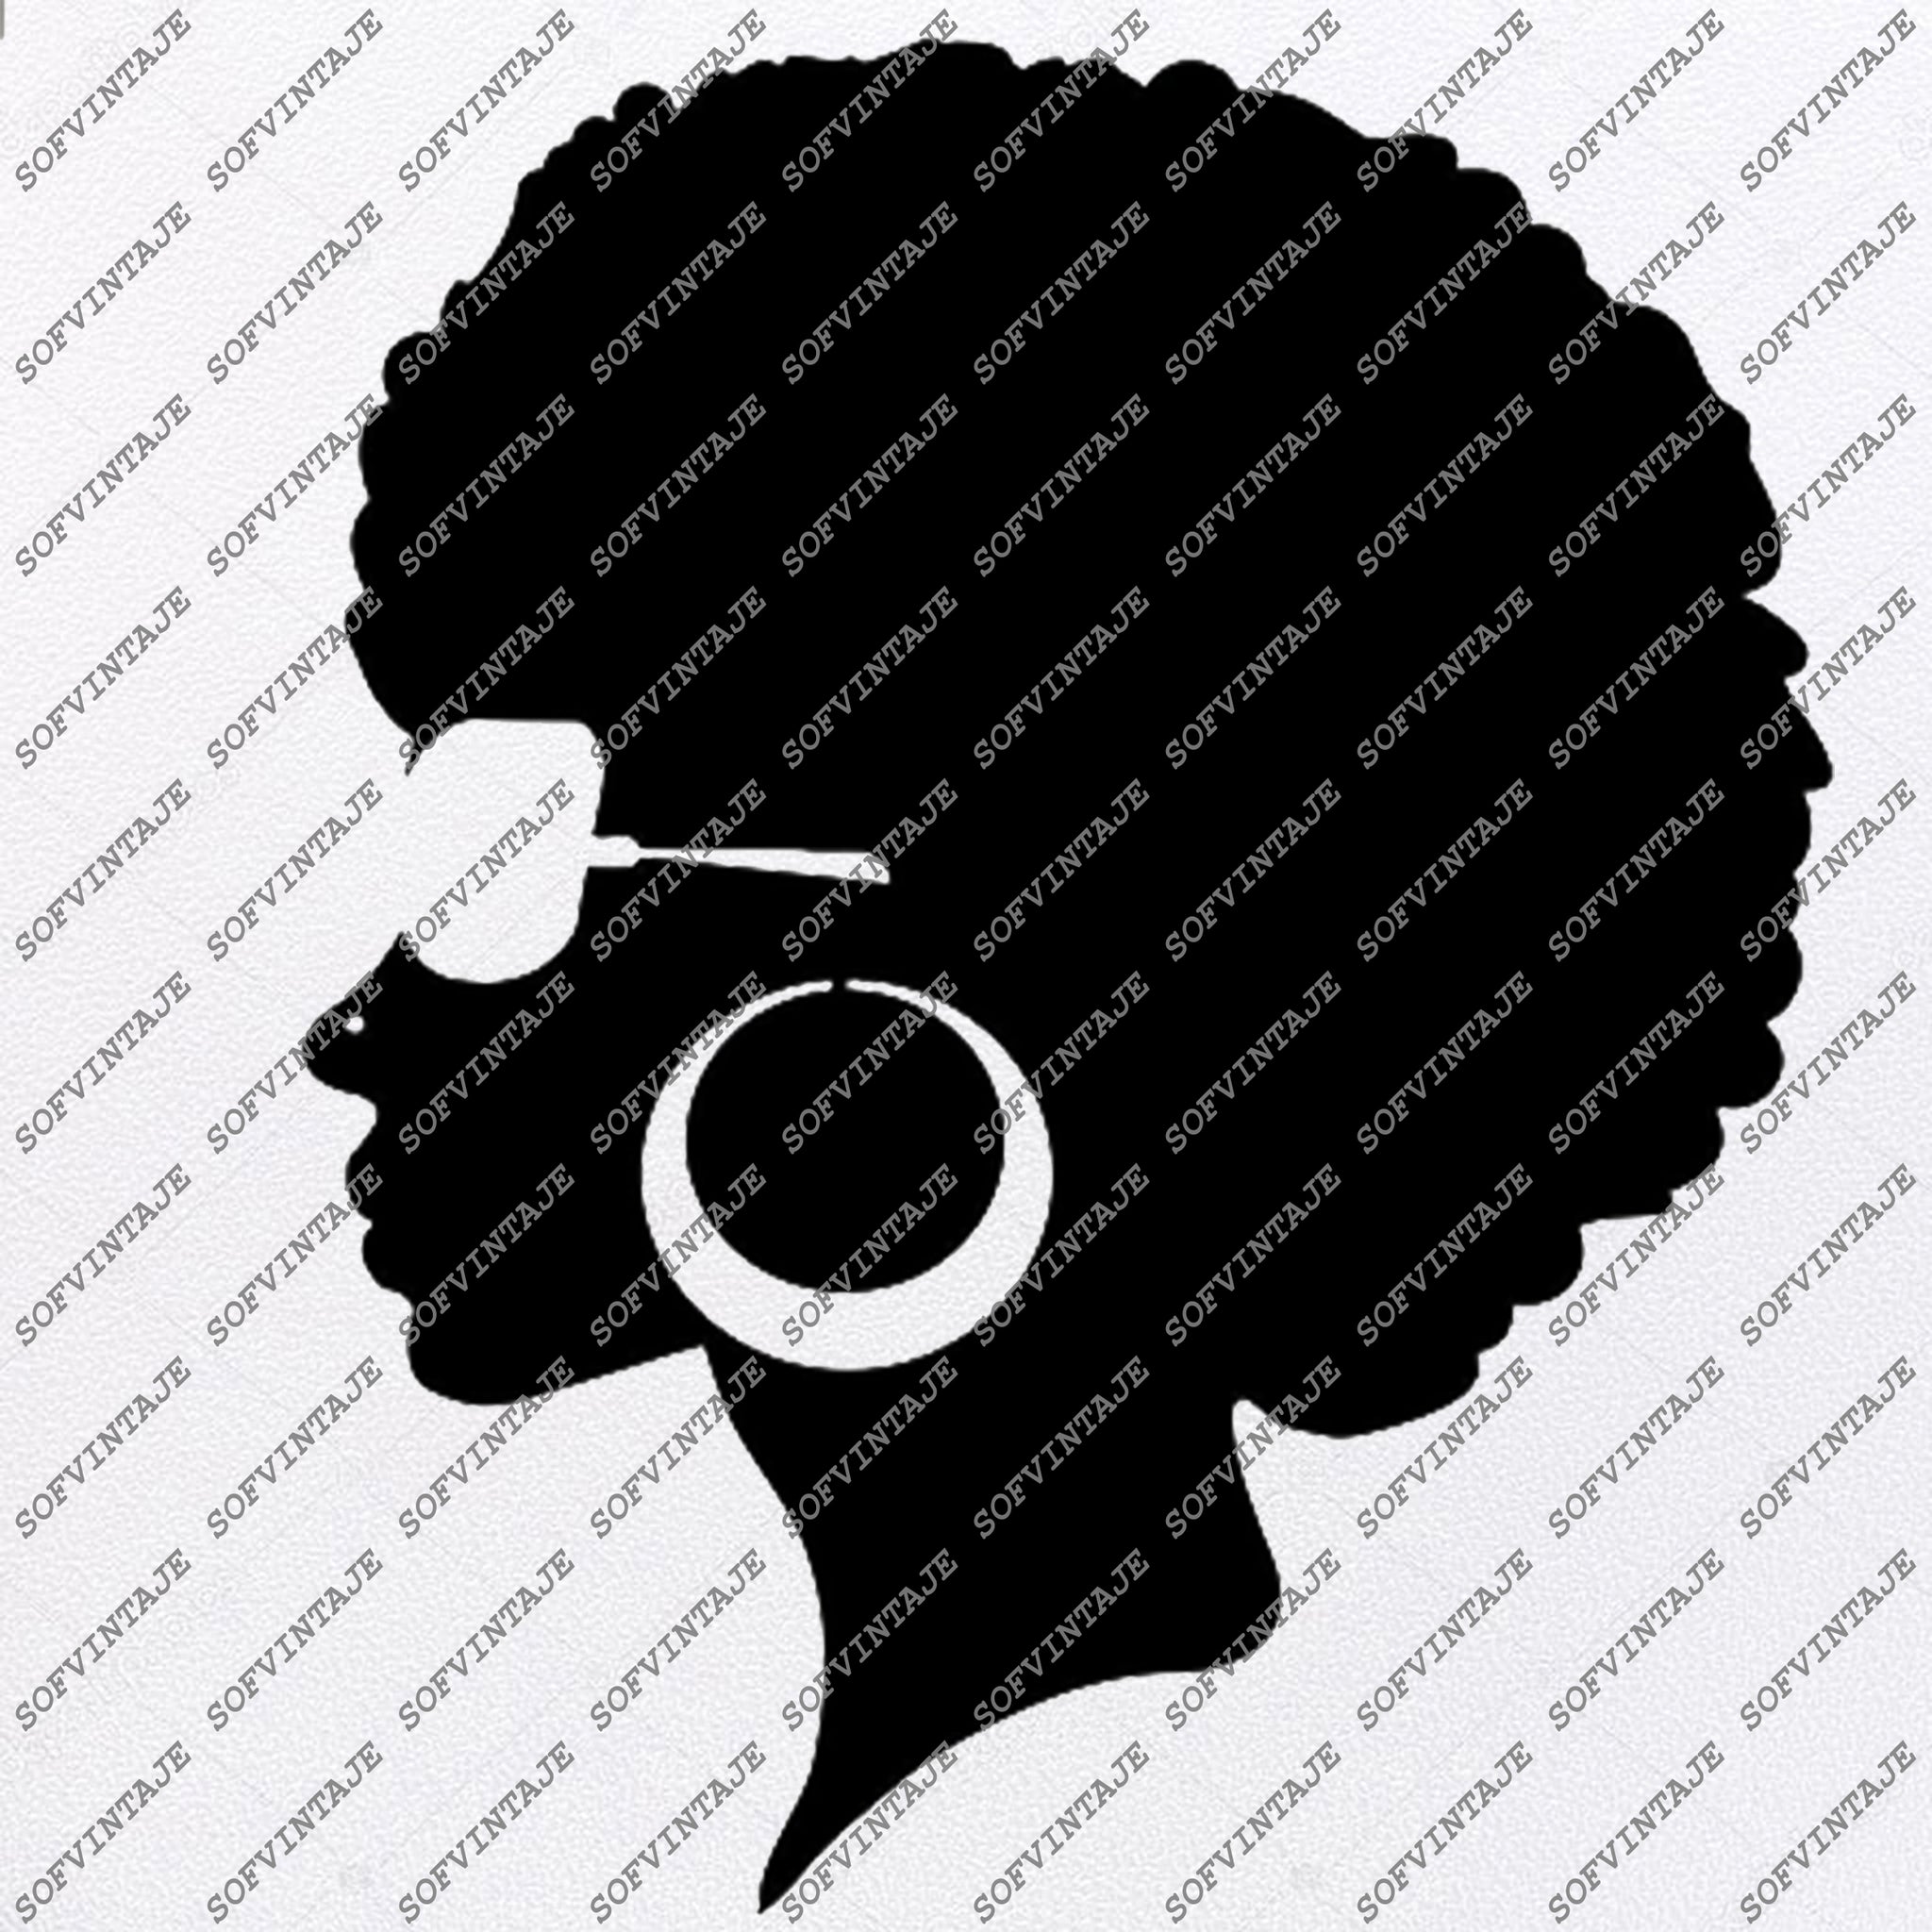 Download African American Girl Silhouette Svg Files - Svg Files For ...